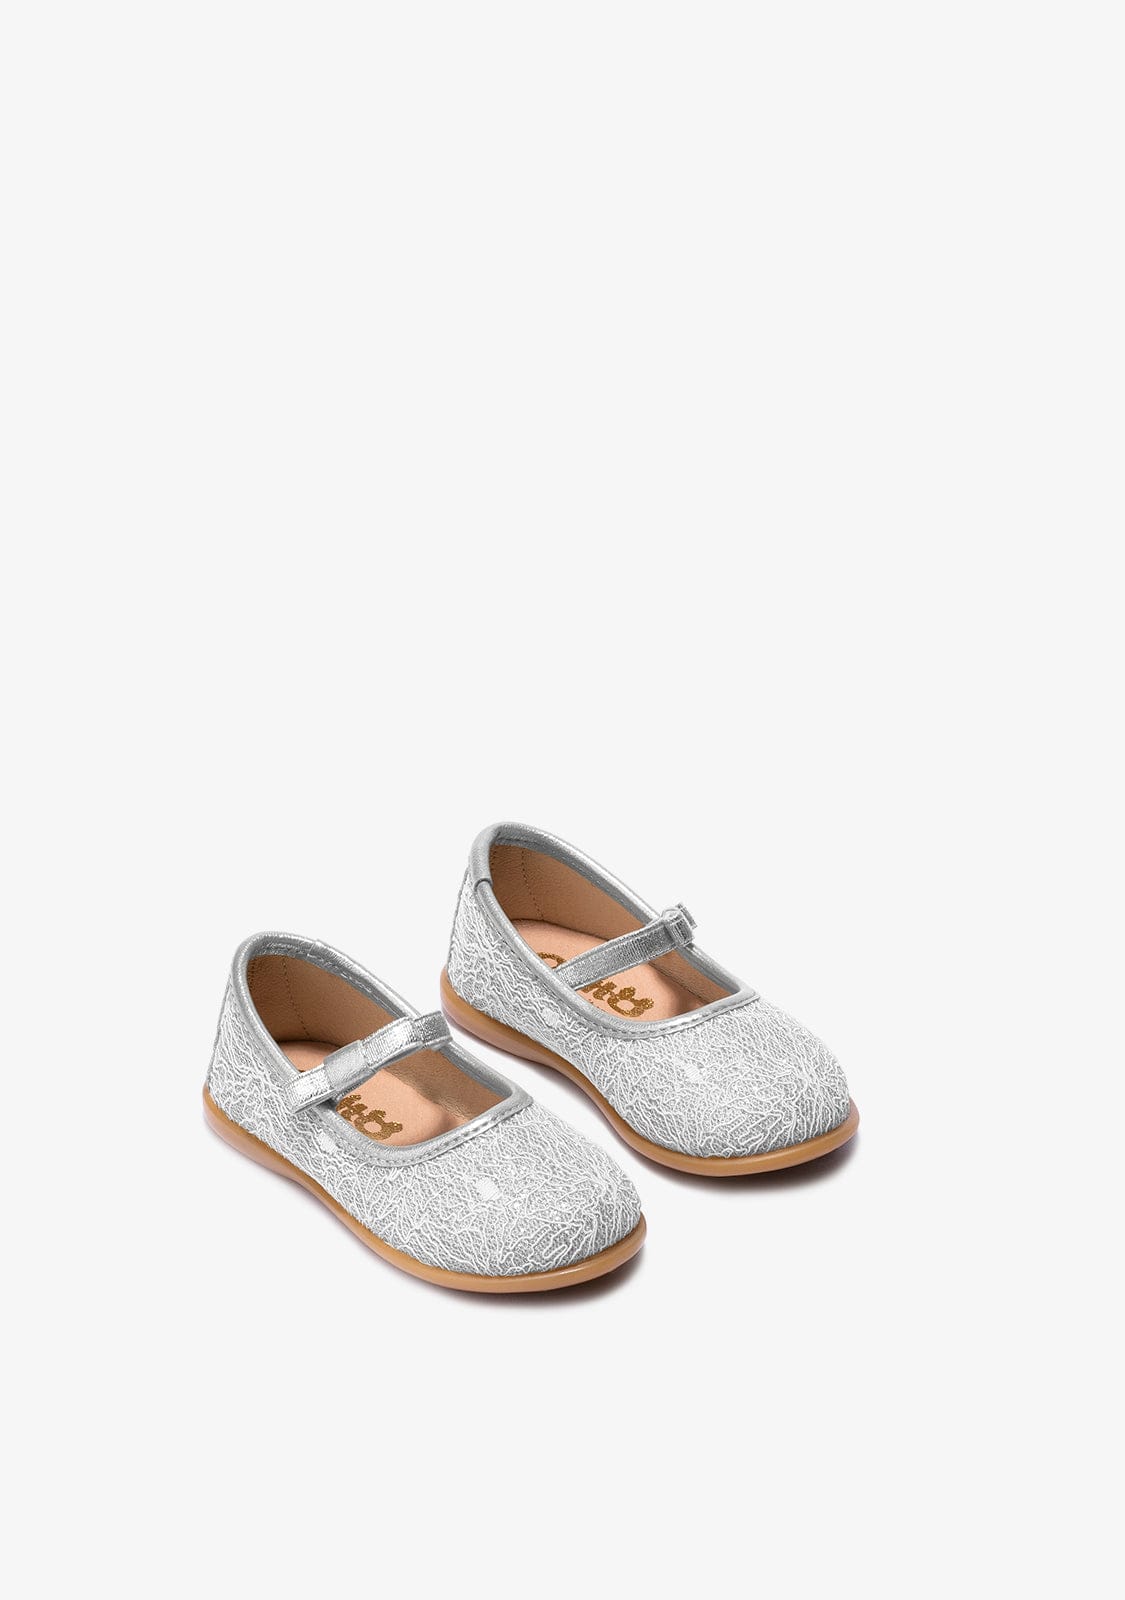 OSITO Shoes Baby's Silver Metallized Texture Ballerinas